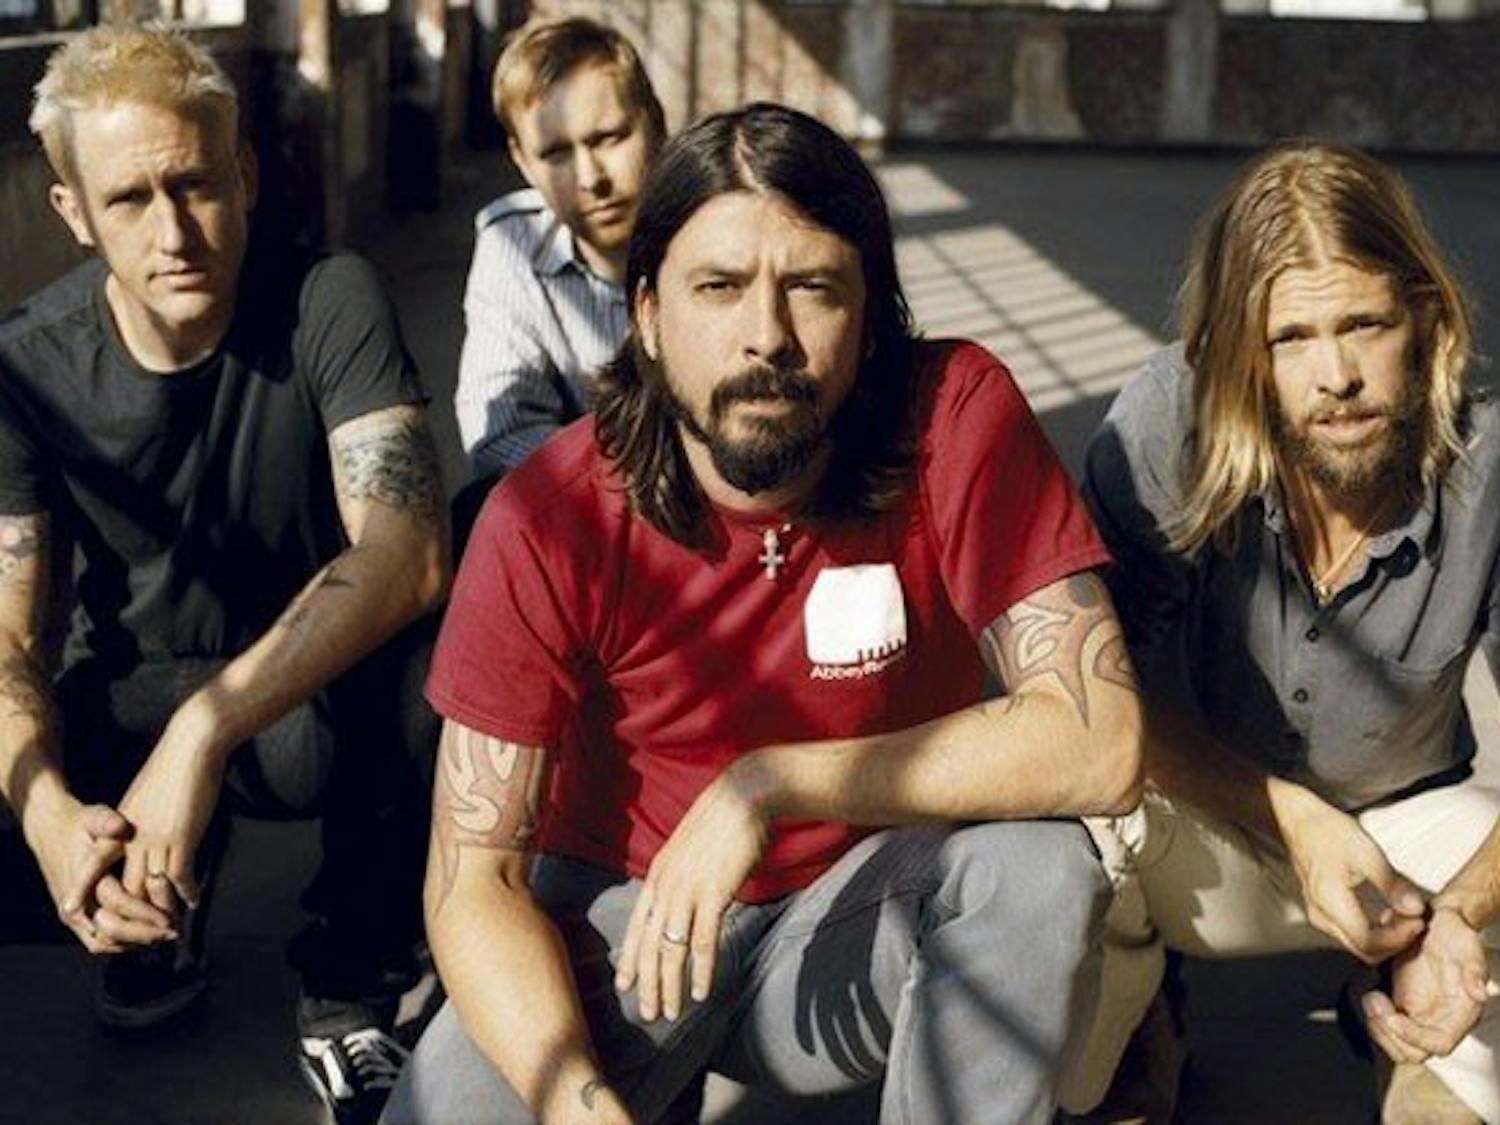 Wasting Light is Foo Fighters' greatest work